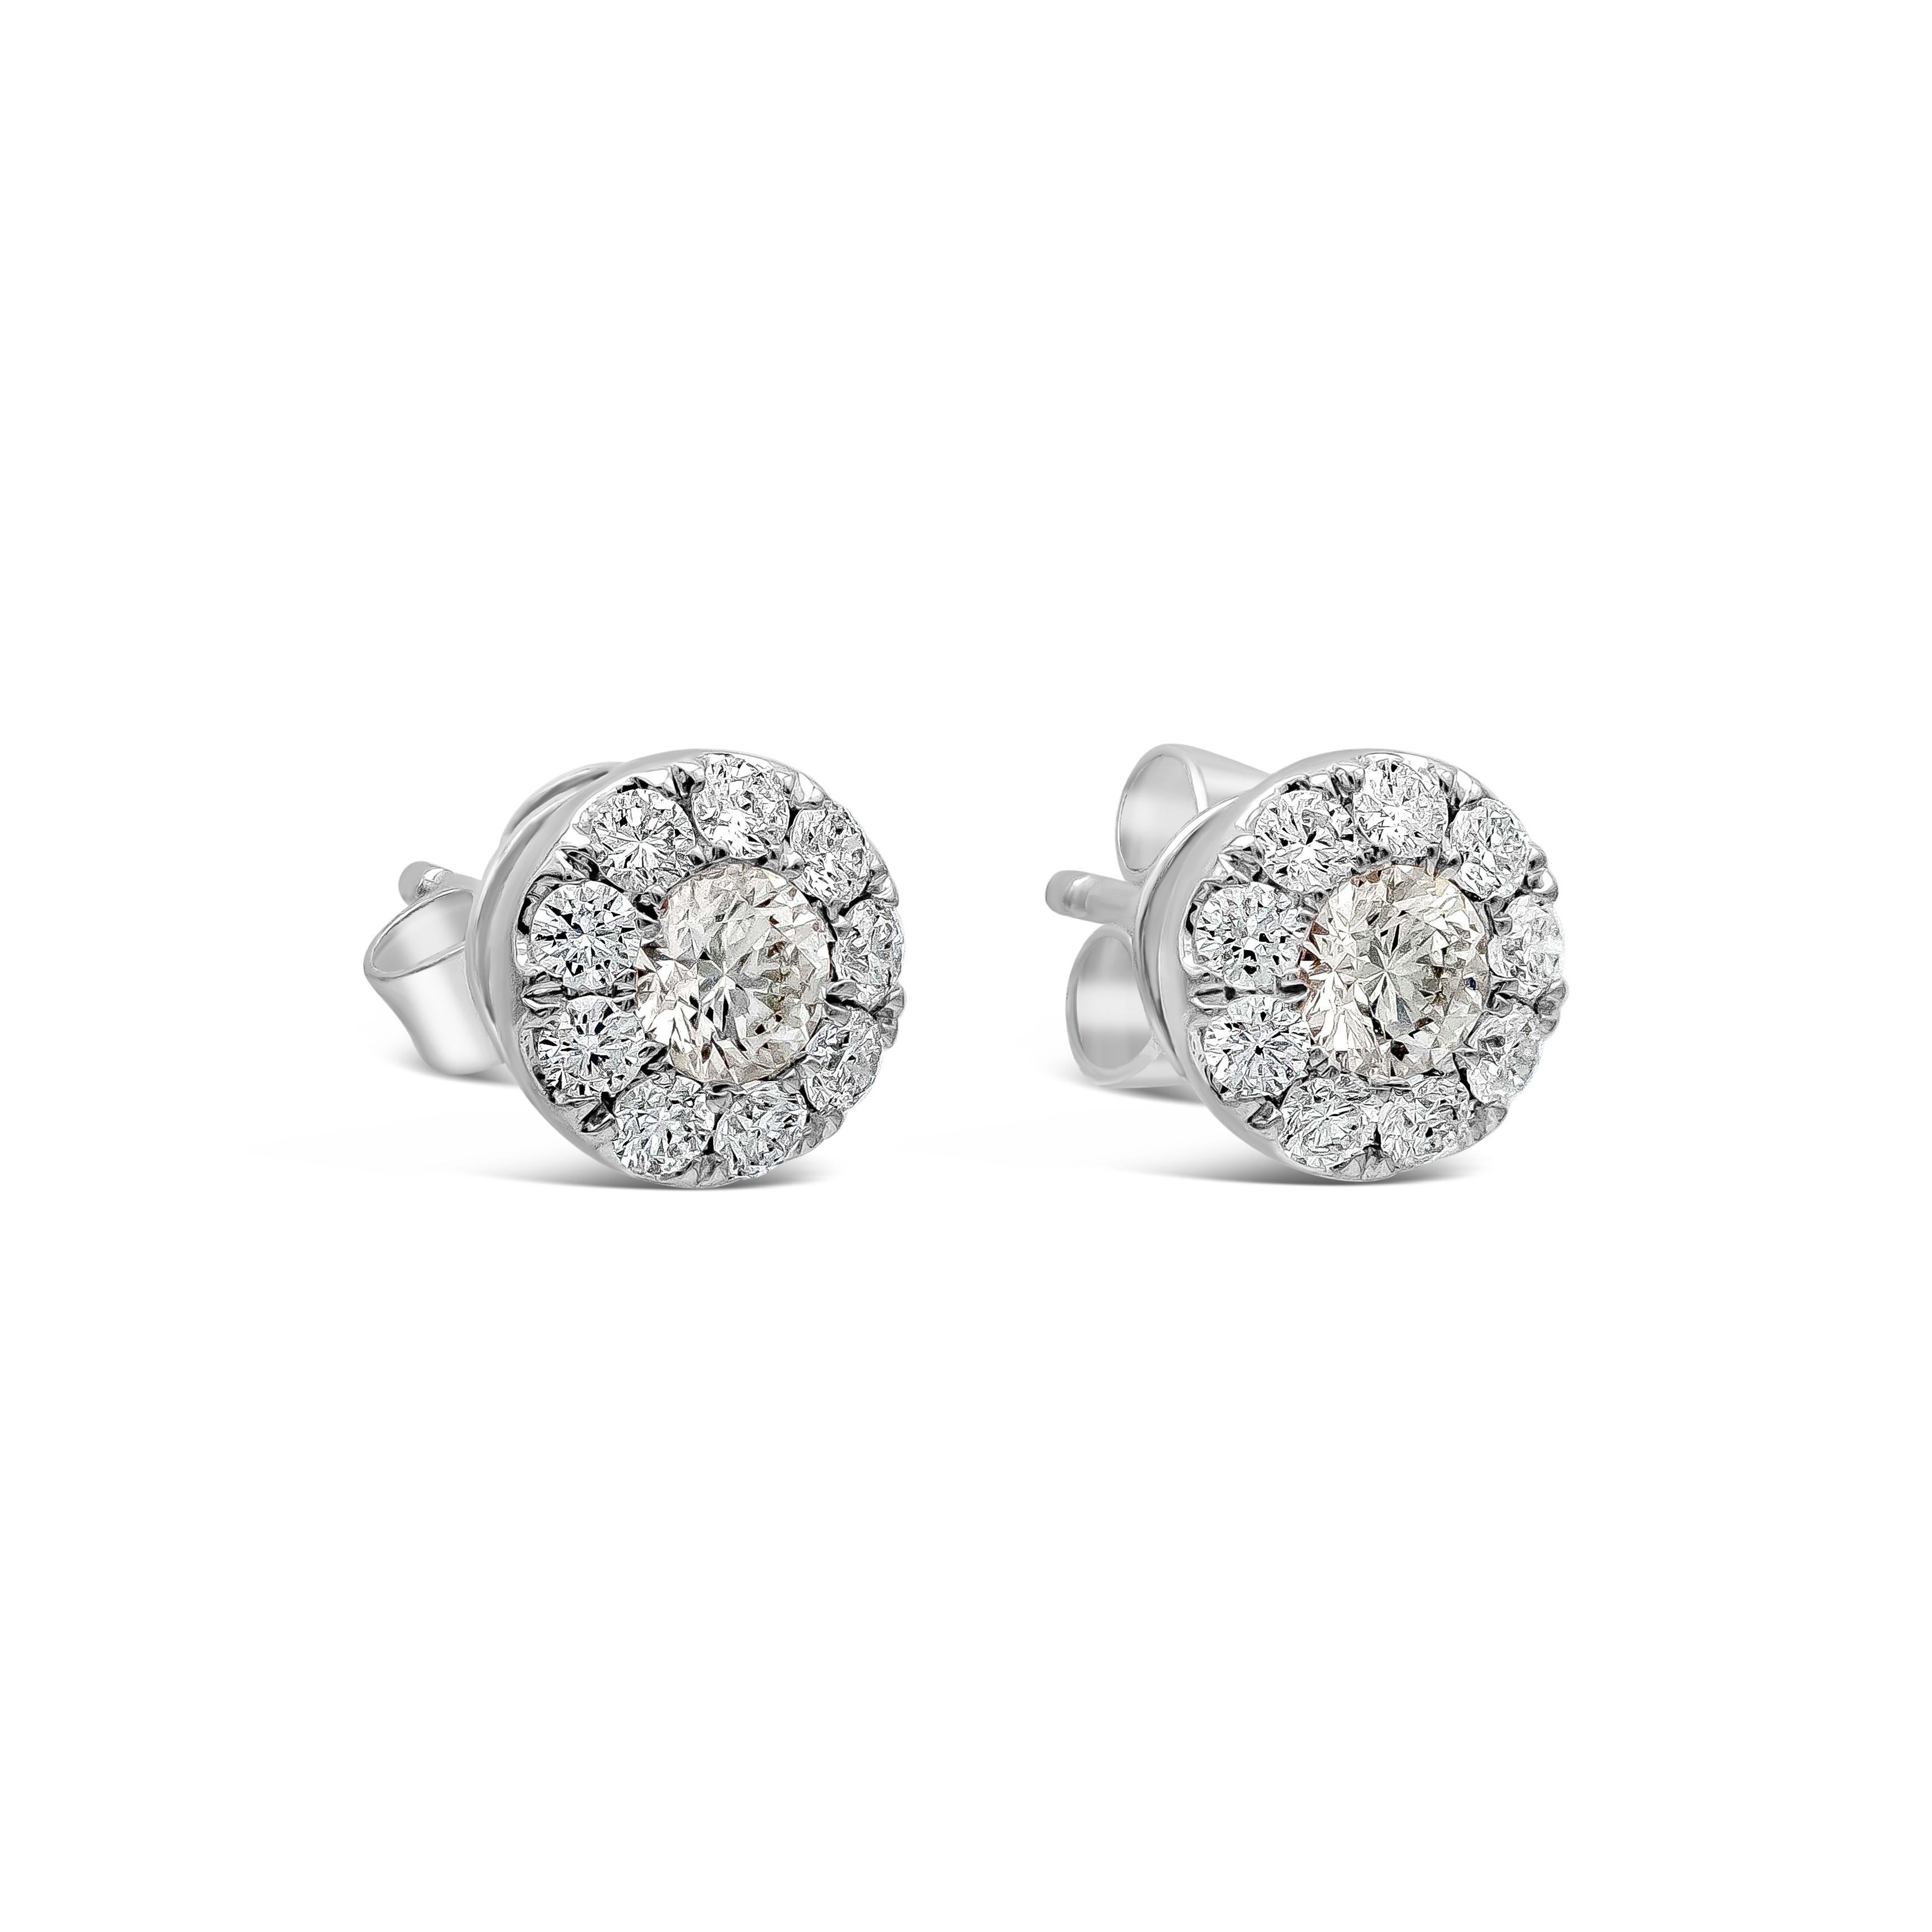 A classic pair of stud earrings showcasing a cluster of round brilliant diamonds set in an 18k white gold mounting. Diamonds weigh 0.85 carats total and are approximately G color, SI clarity. 

Style available in different price ranges. Prices are